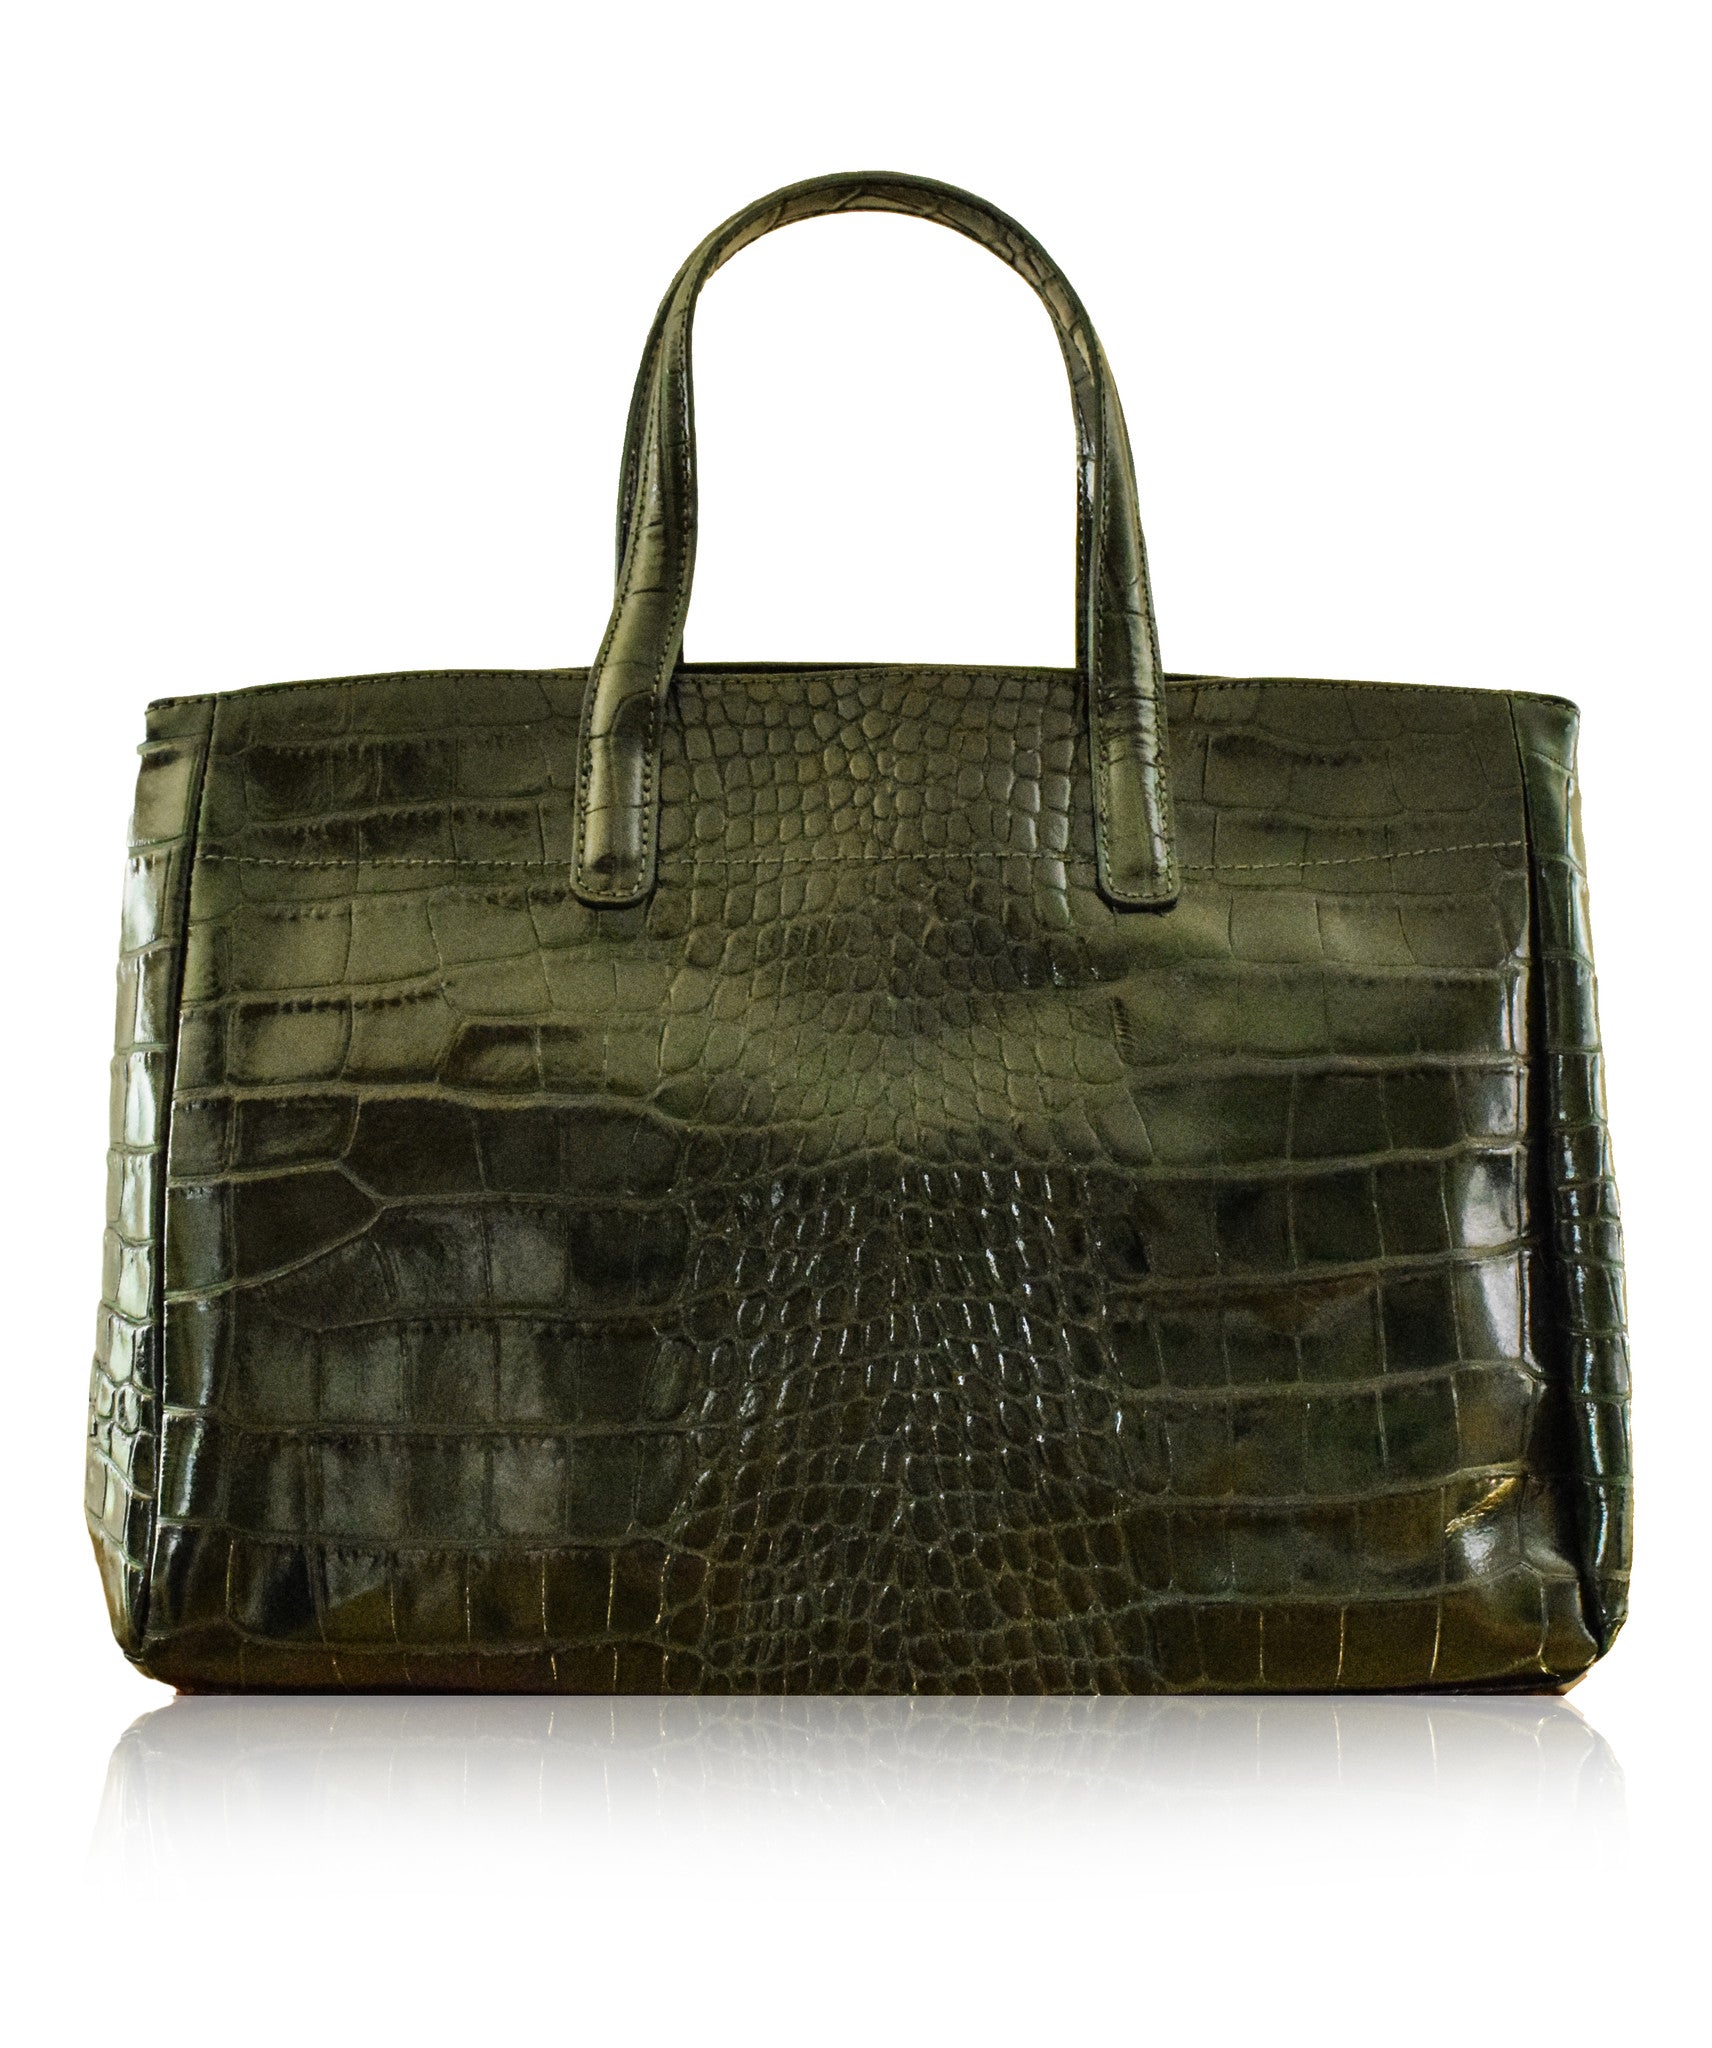 GODENZO Green Longchamp Roseau Style Italian Leather Tote Bag | Florence Leather Collection